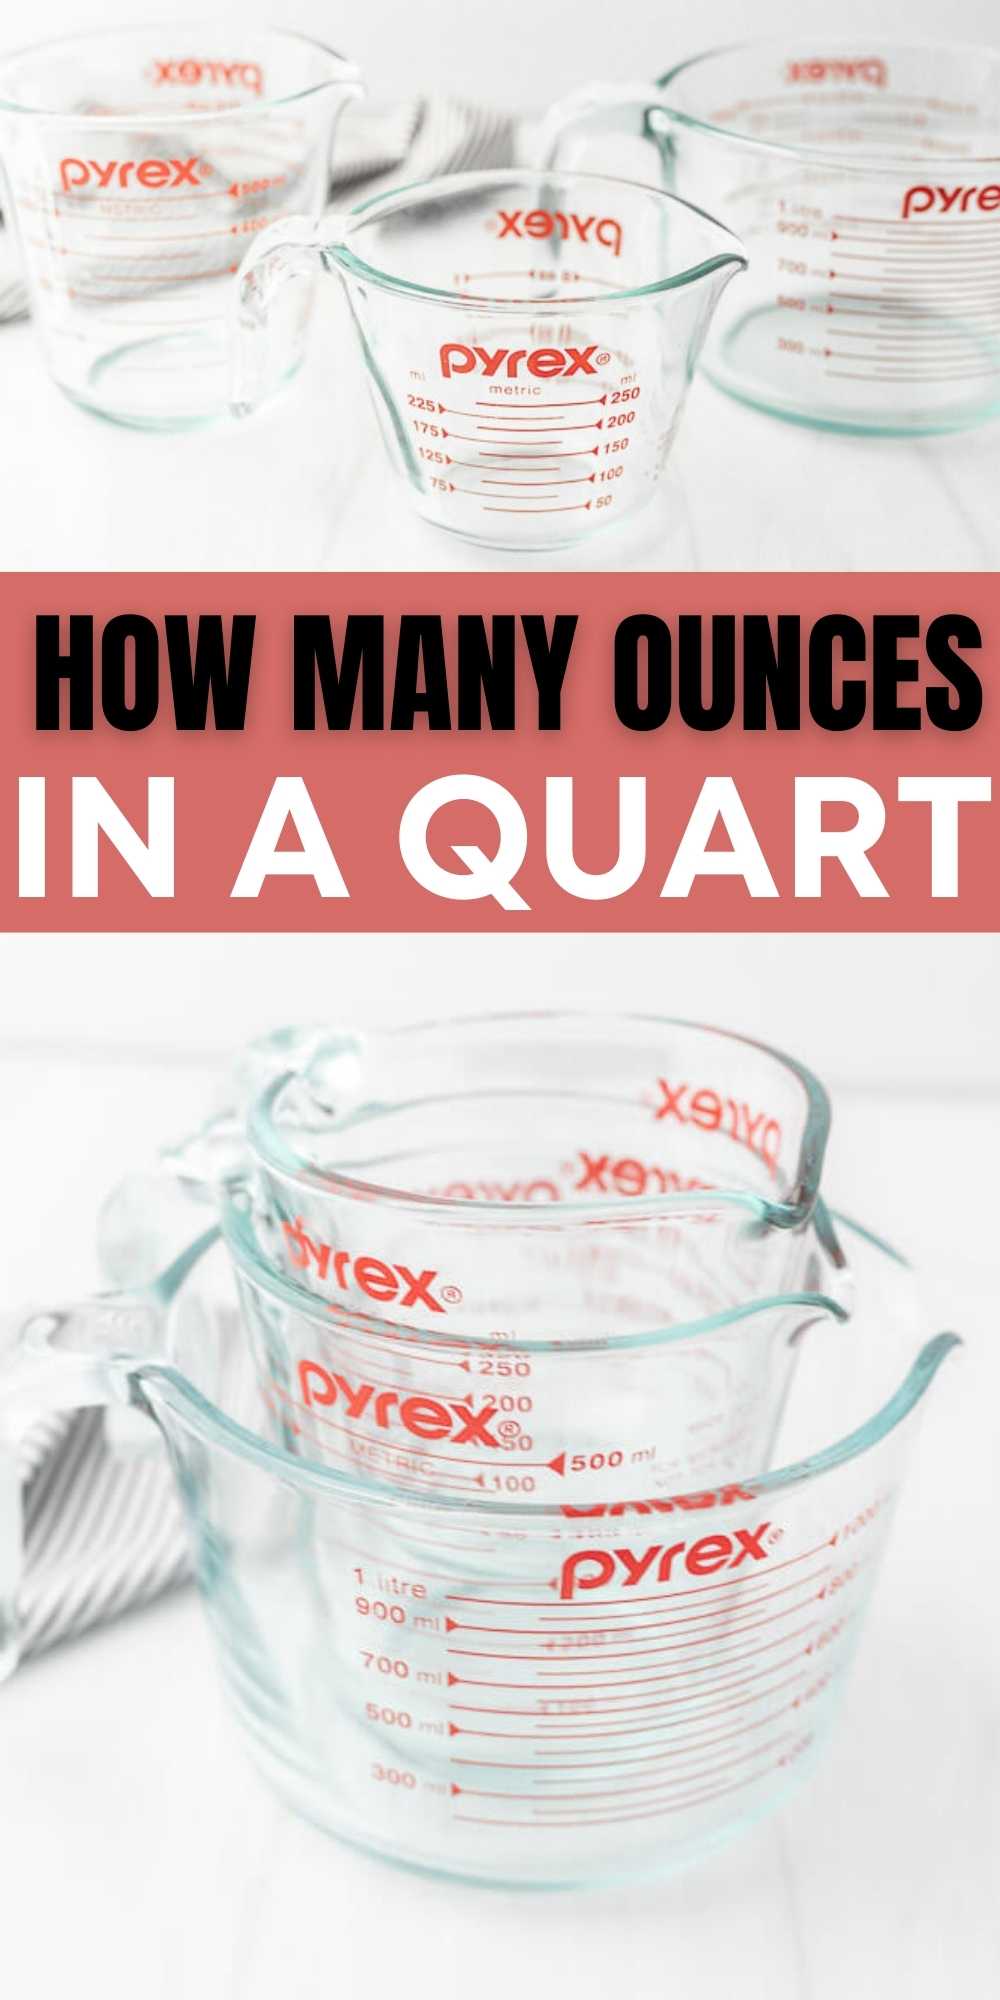 If you need to make adjustments to your recipes, we will show you How Many Ounces in a Quart. Easy conversions to help save your recipe. #eatingonadime #kitchentips #converstions 
